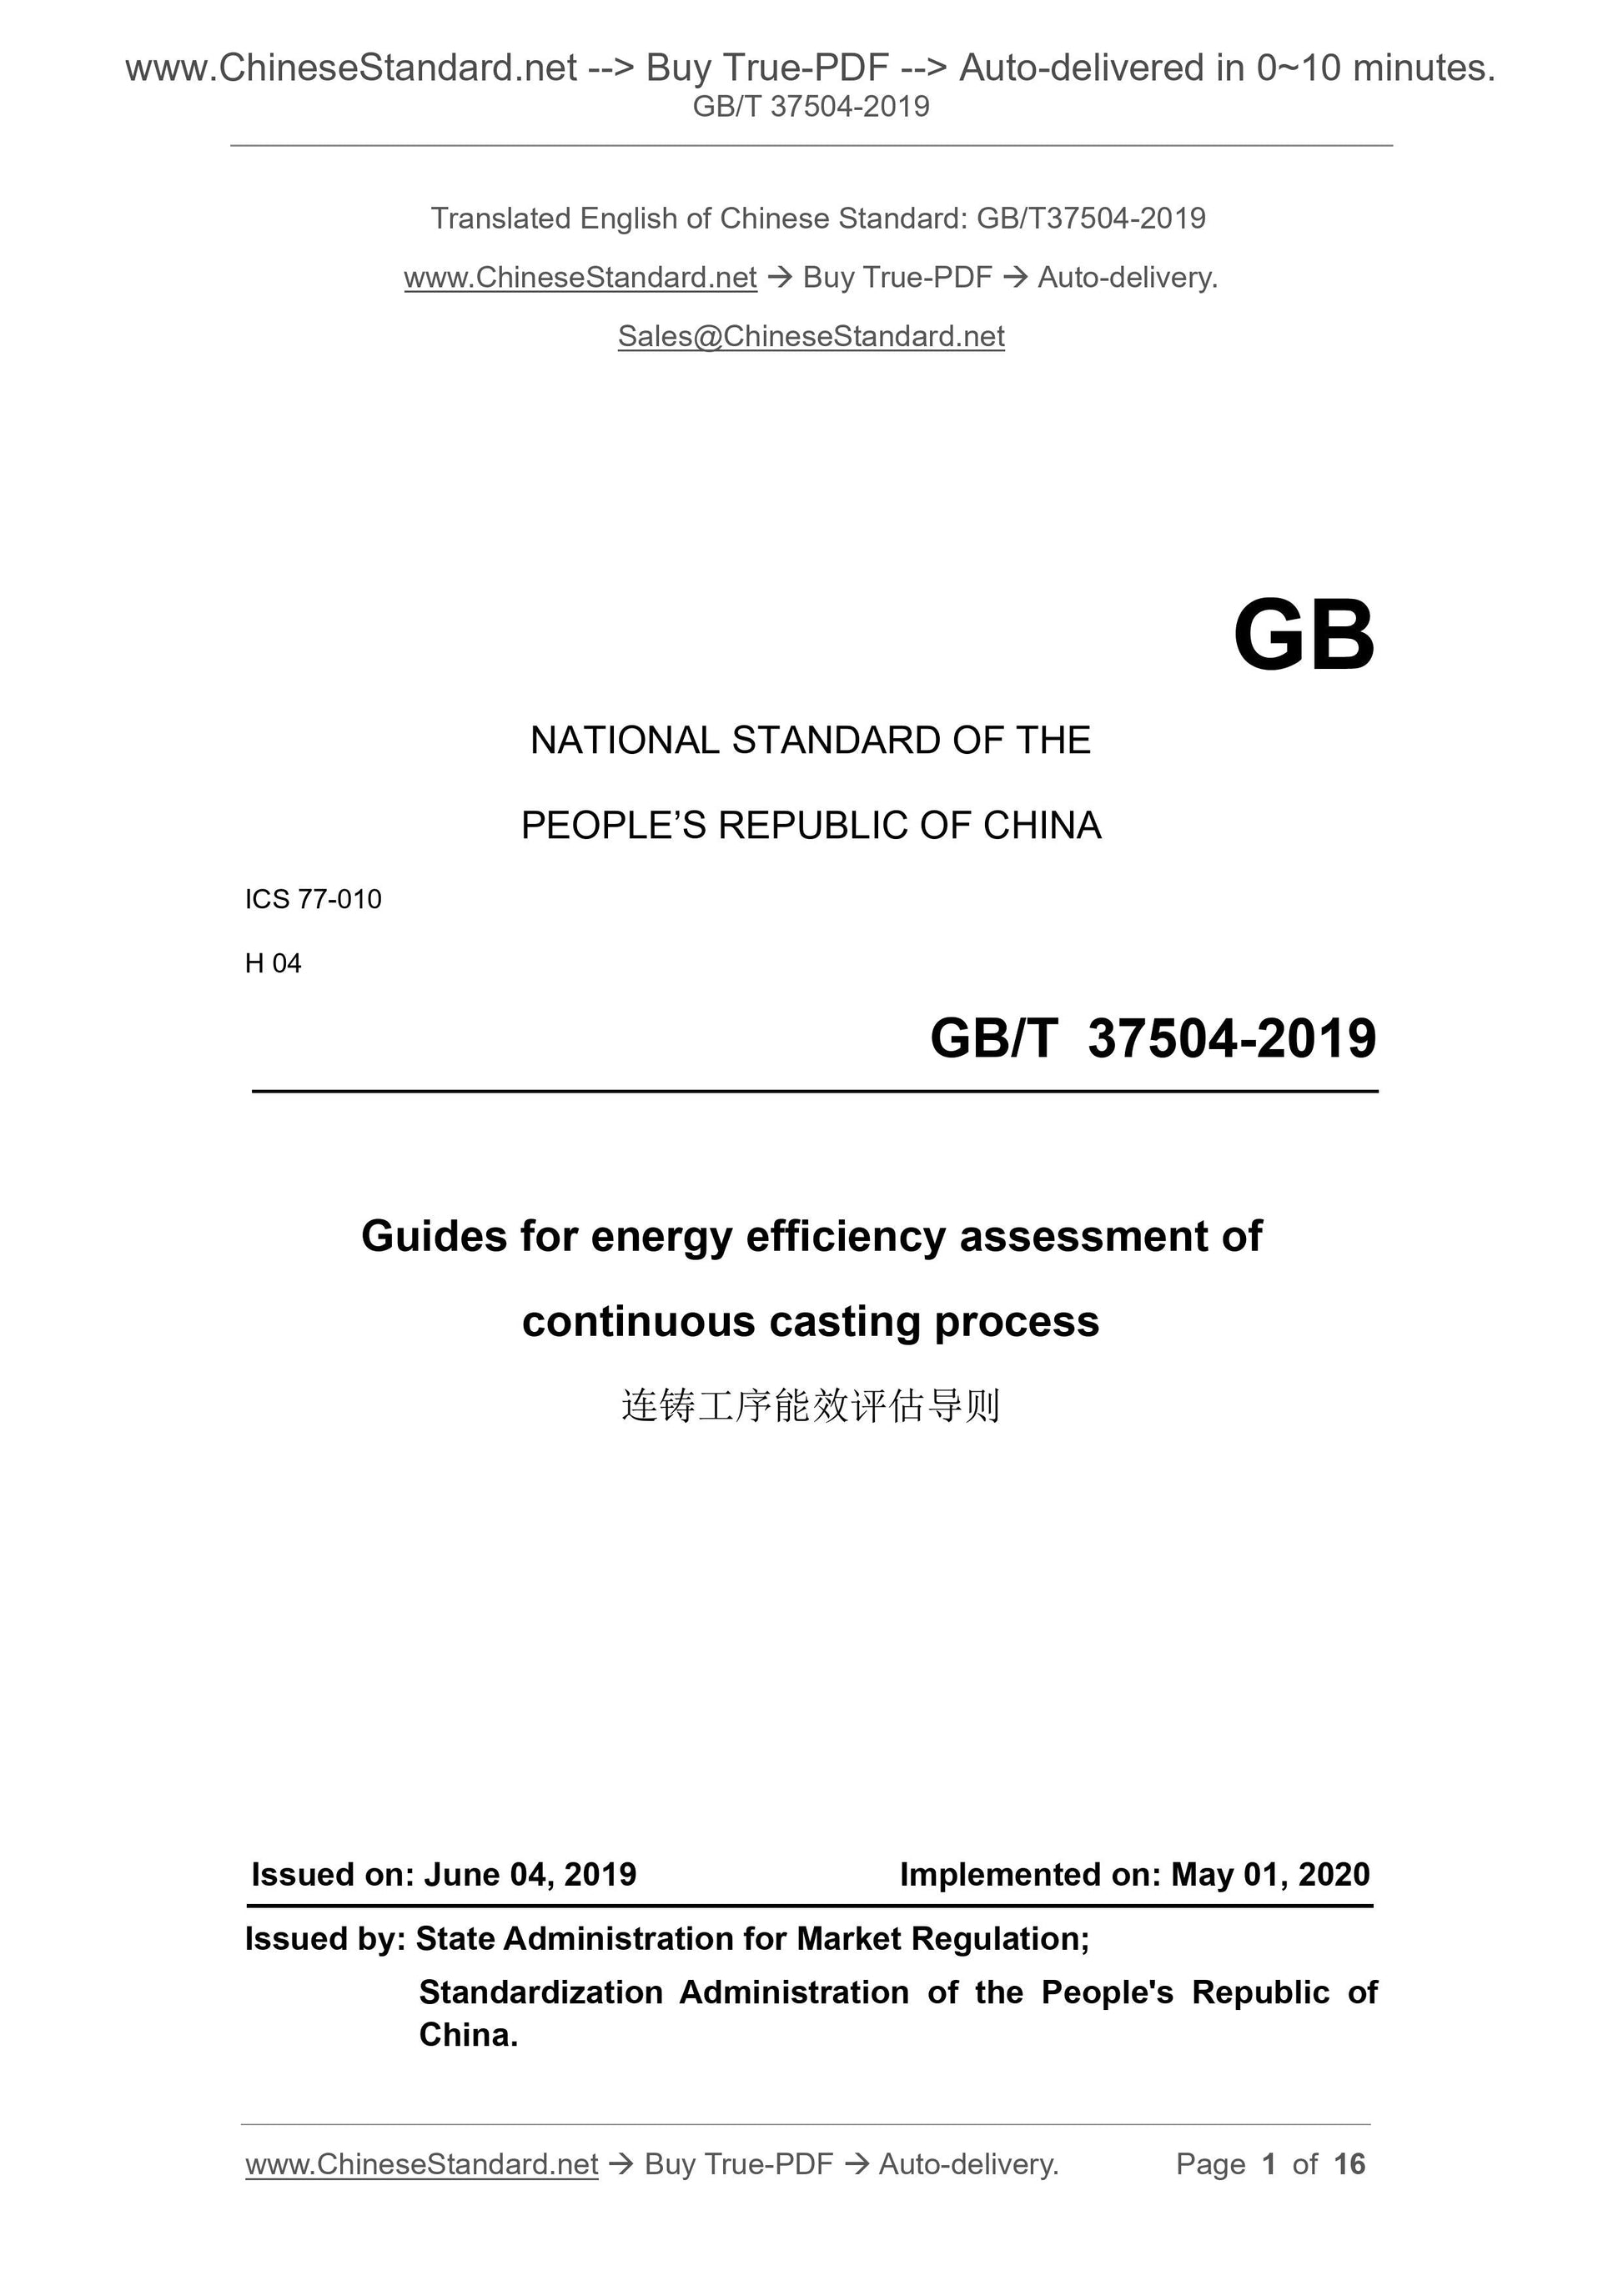 GB/T 37504-2019 Page 1